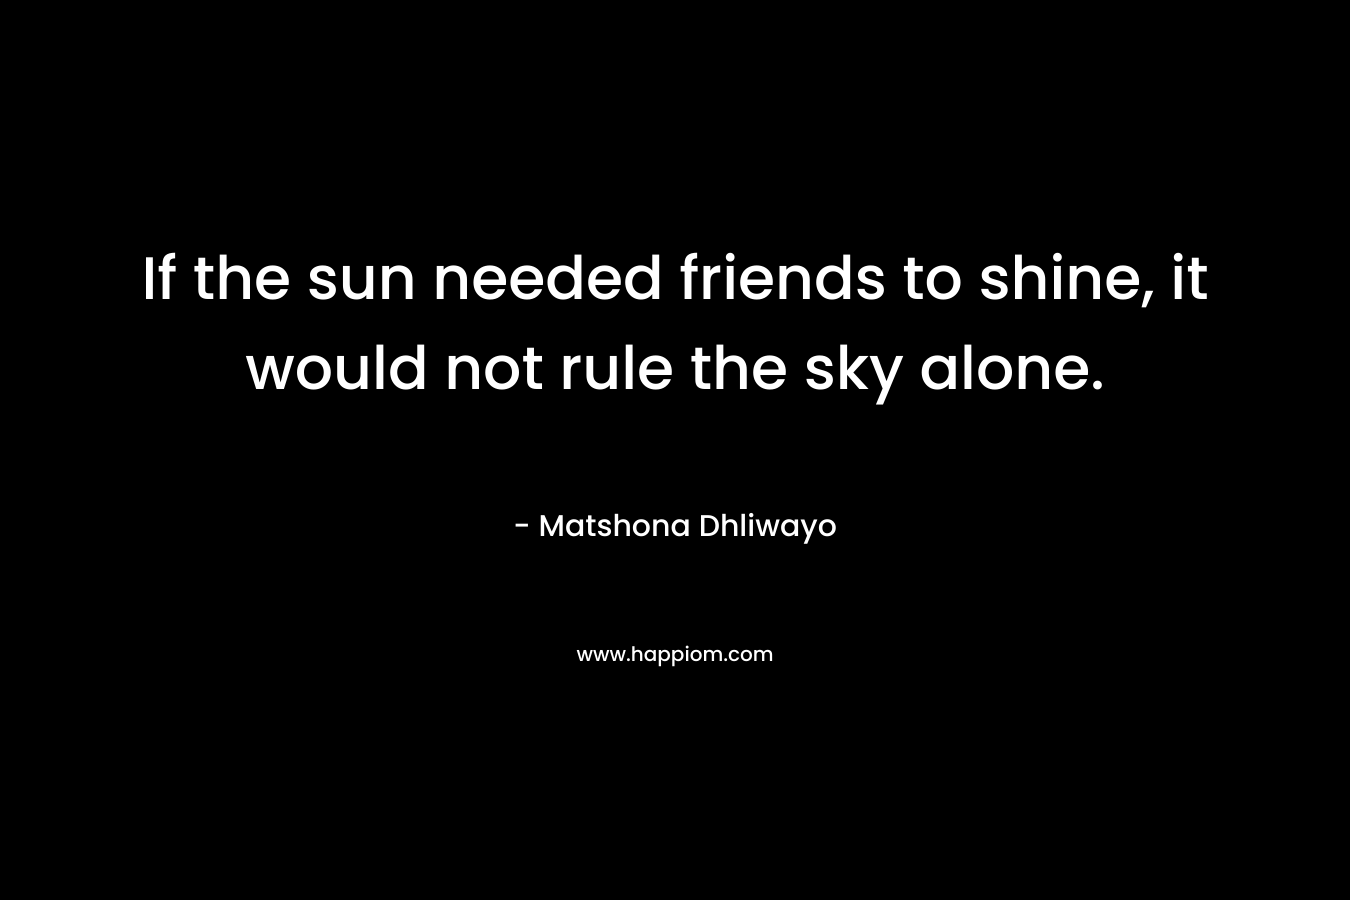 If the sun needed friends to shine, it would not rule the sky alone.